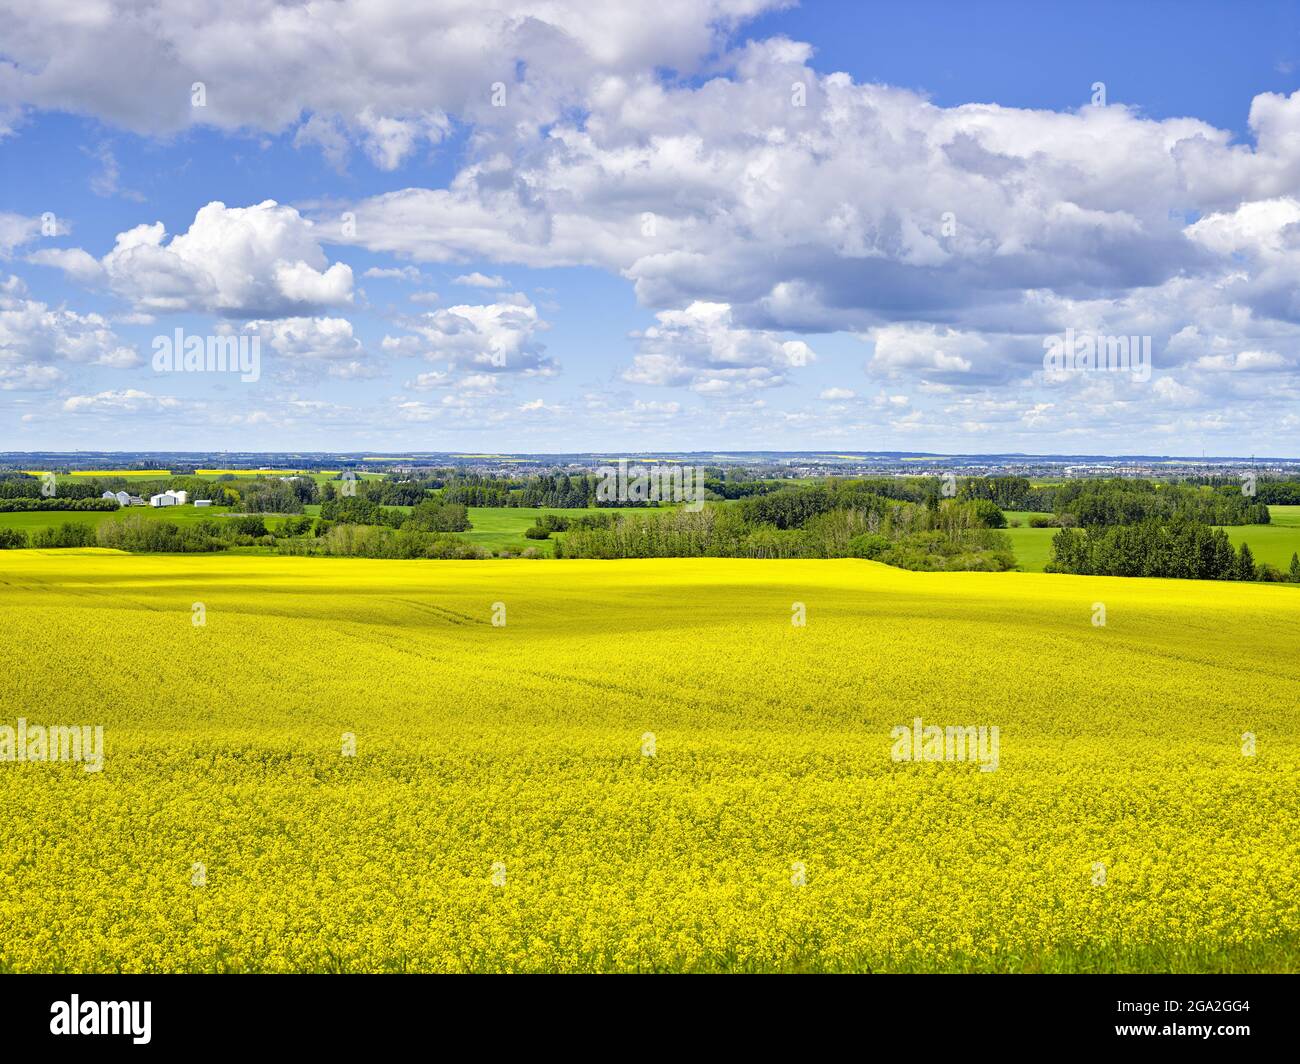 Vibrant yellow canola field with the prairie landscape stretching out to the horizon under a cloudy, blue sky; Alberta, Canada Stock Photo